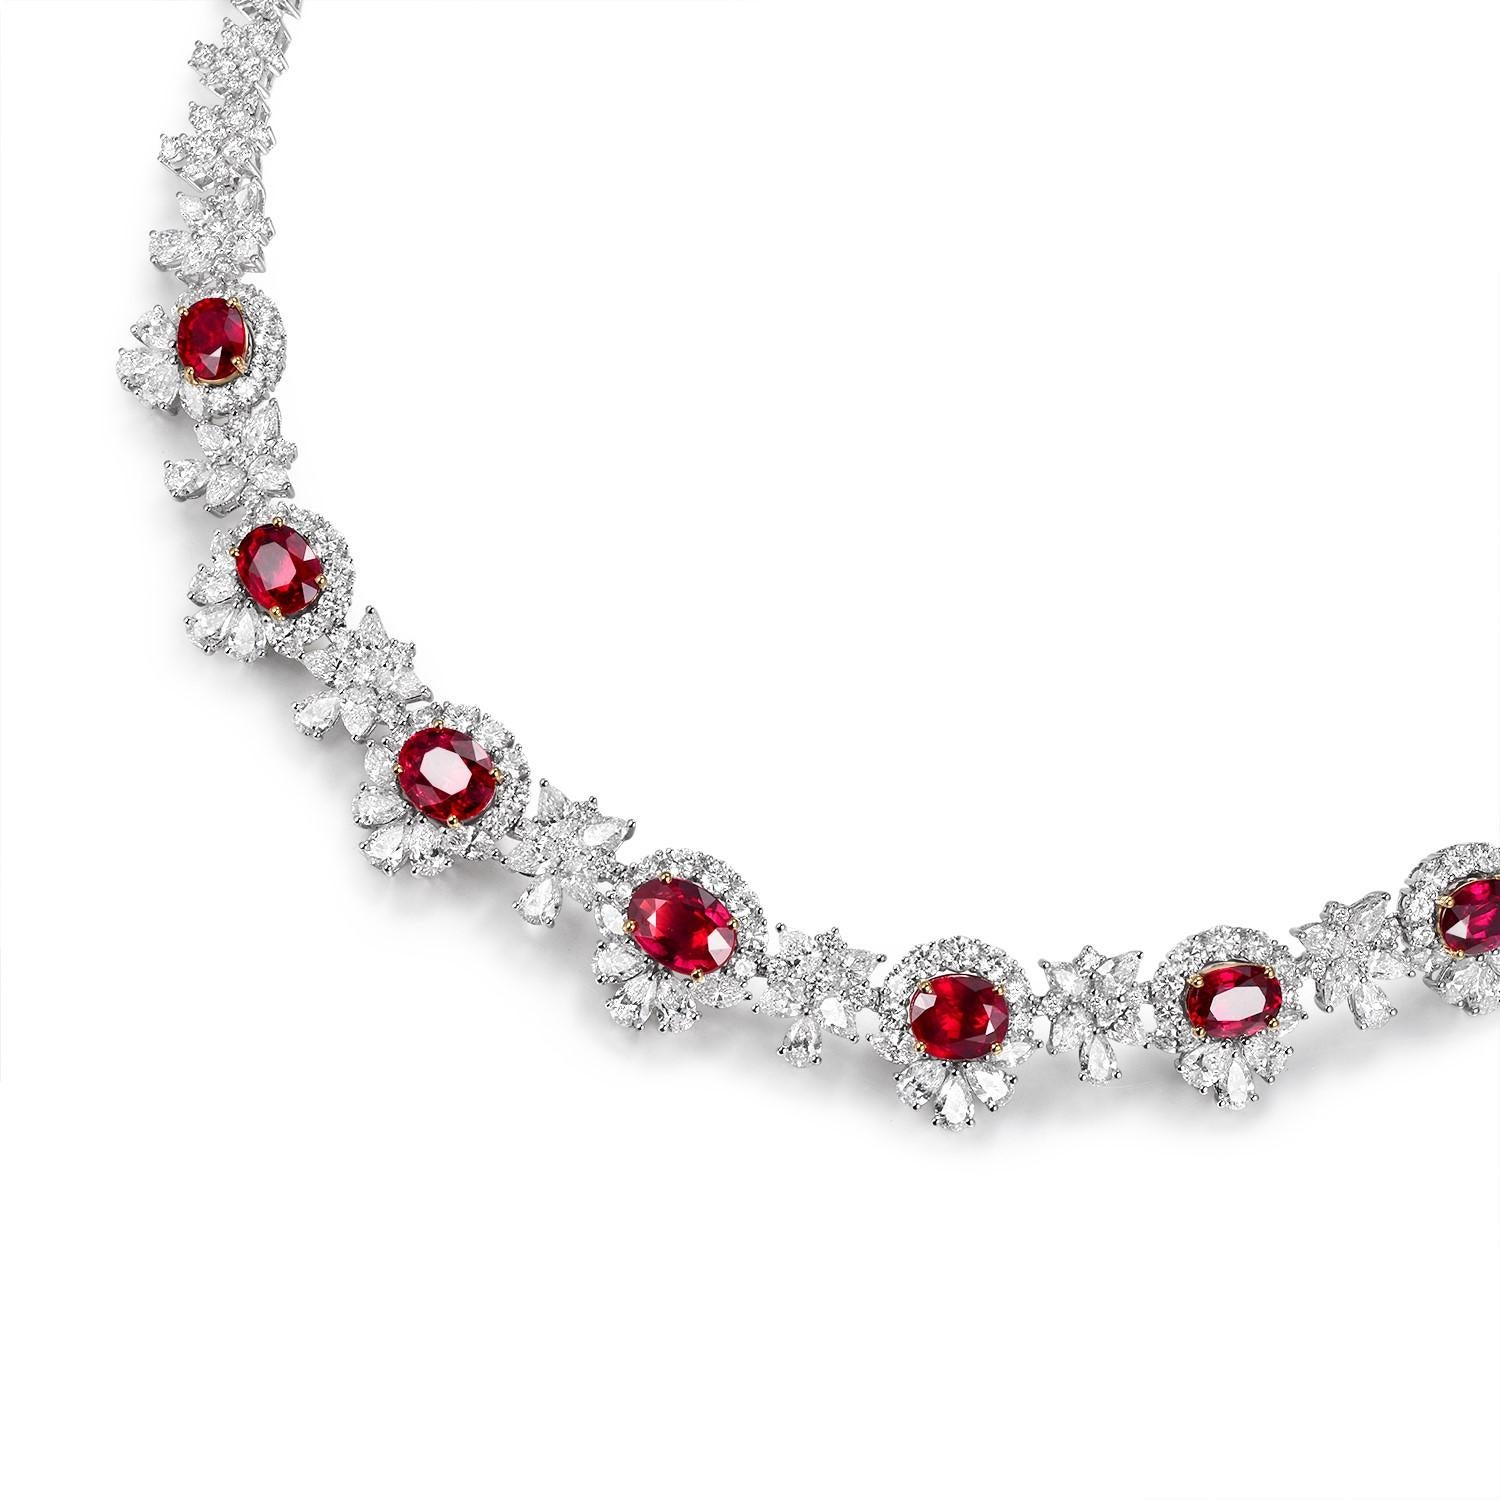 This exquisite necklace is a statement piece that exudes luxury and sophistication. Crafted in lustrous 18K white gold, it features a symphony of seven meticulously selected Mozambique rubies, weighing a total of 12.03 carats. These rubies, known